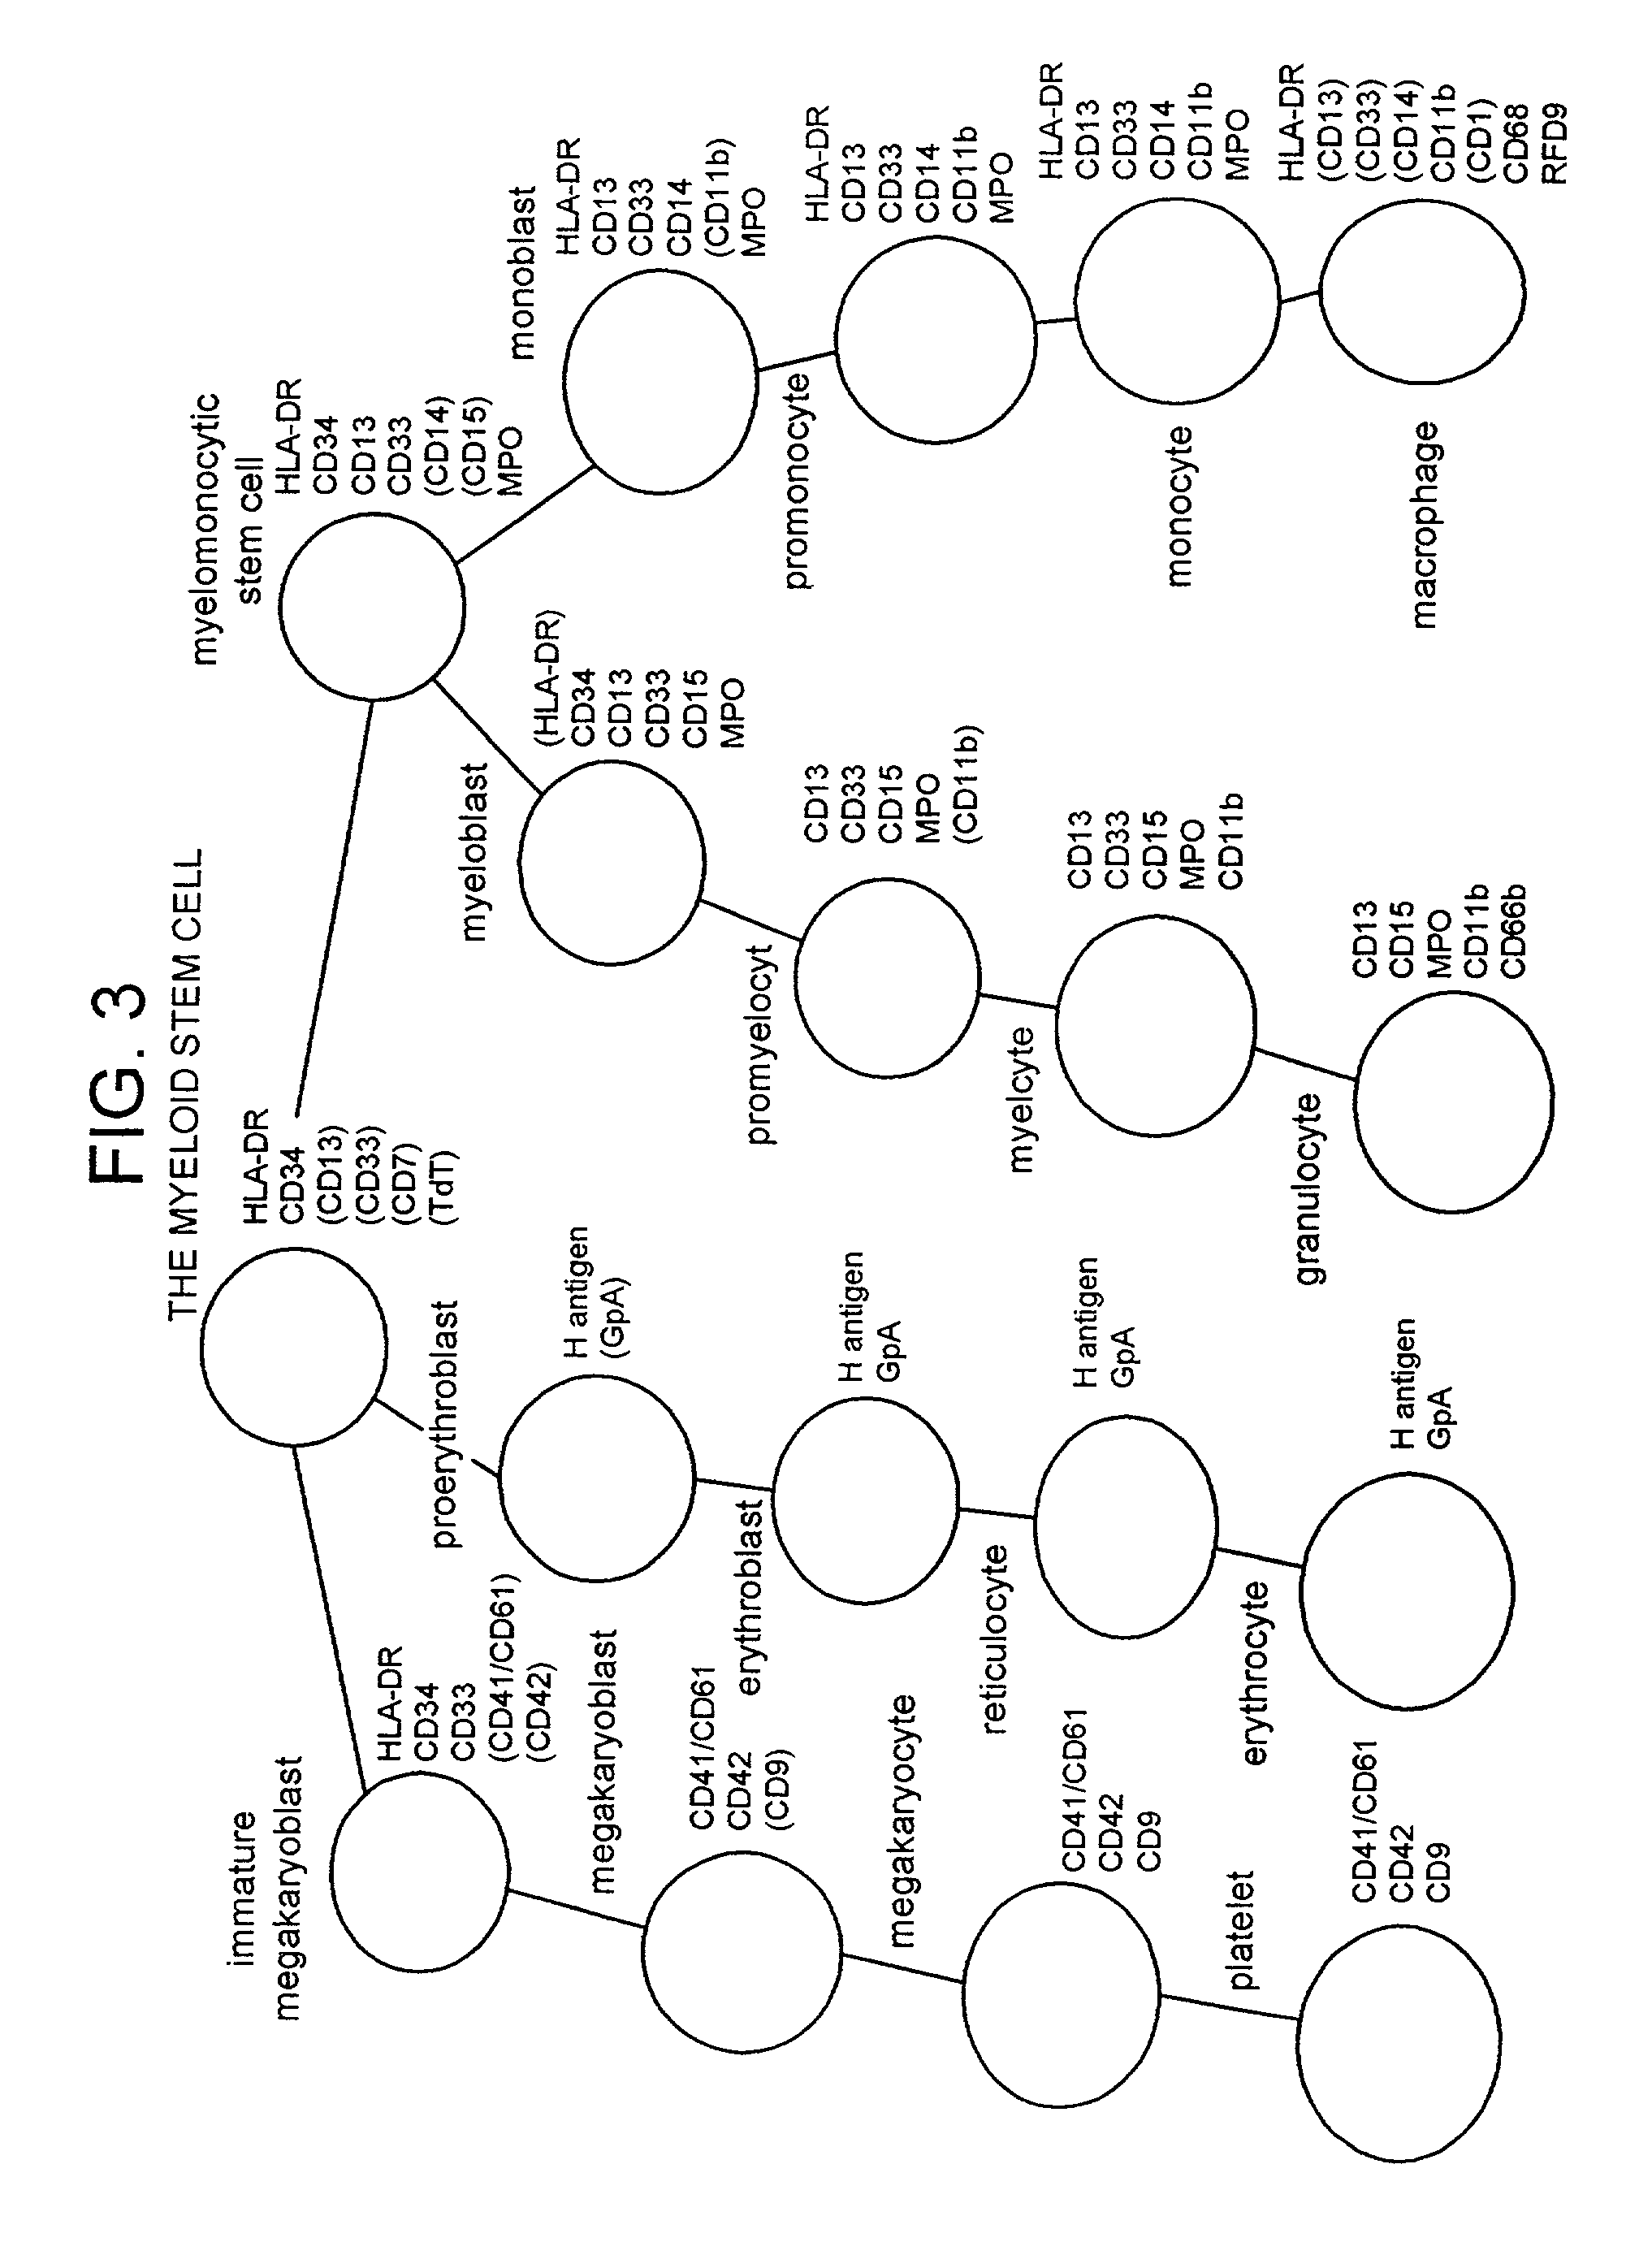 Method of preparing an undifferentiated cell